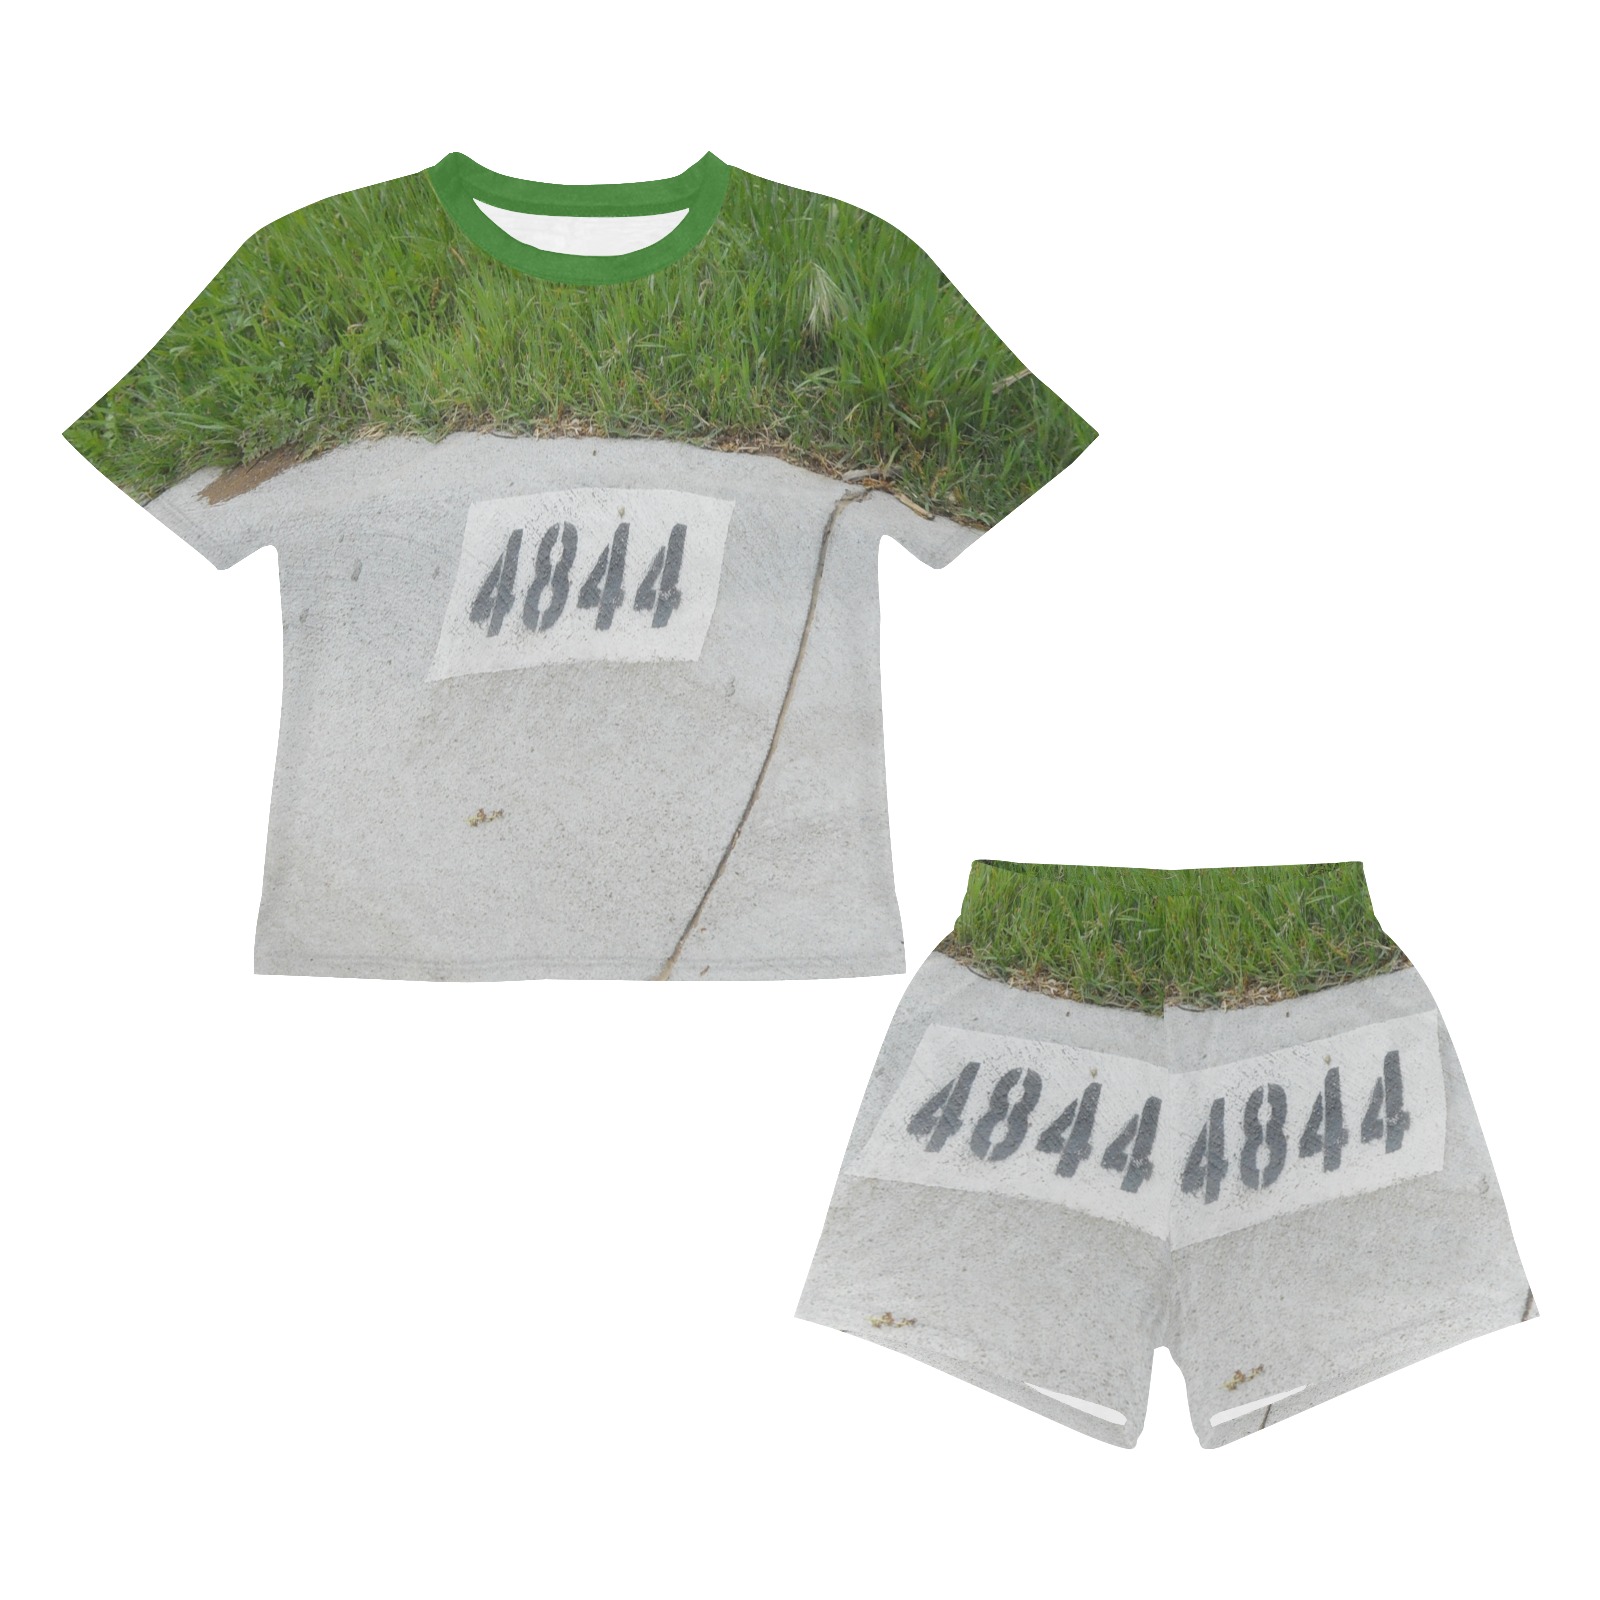 Street Number 4844 with Bright Green Collar Little Girls' Short Pajama Set